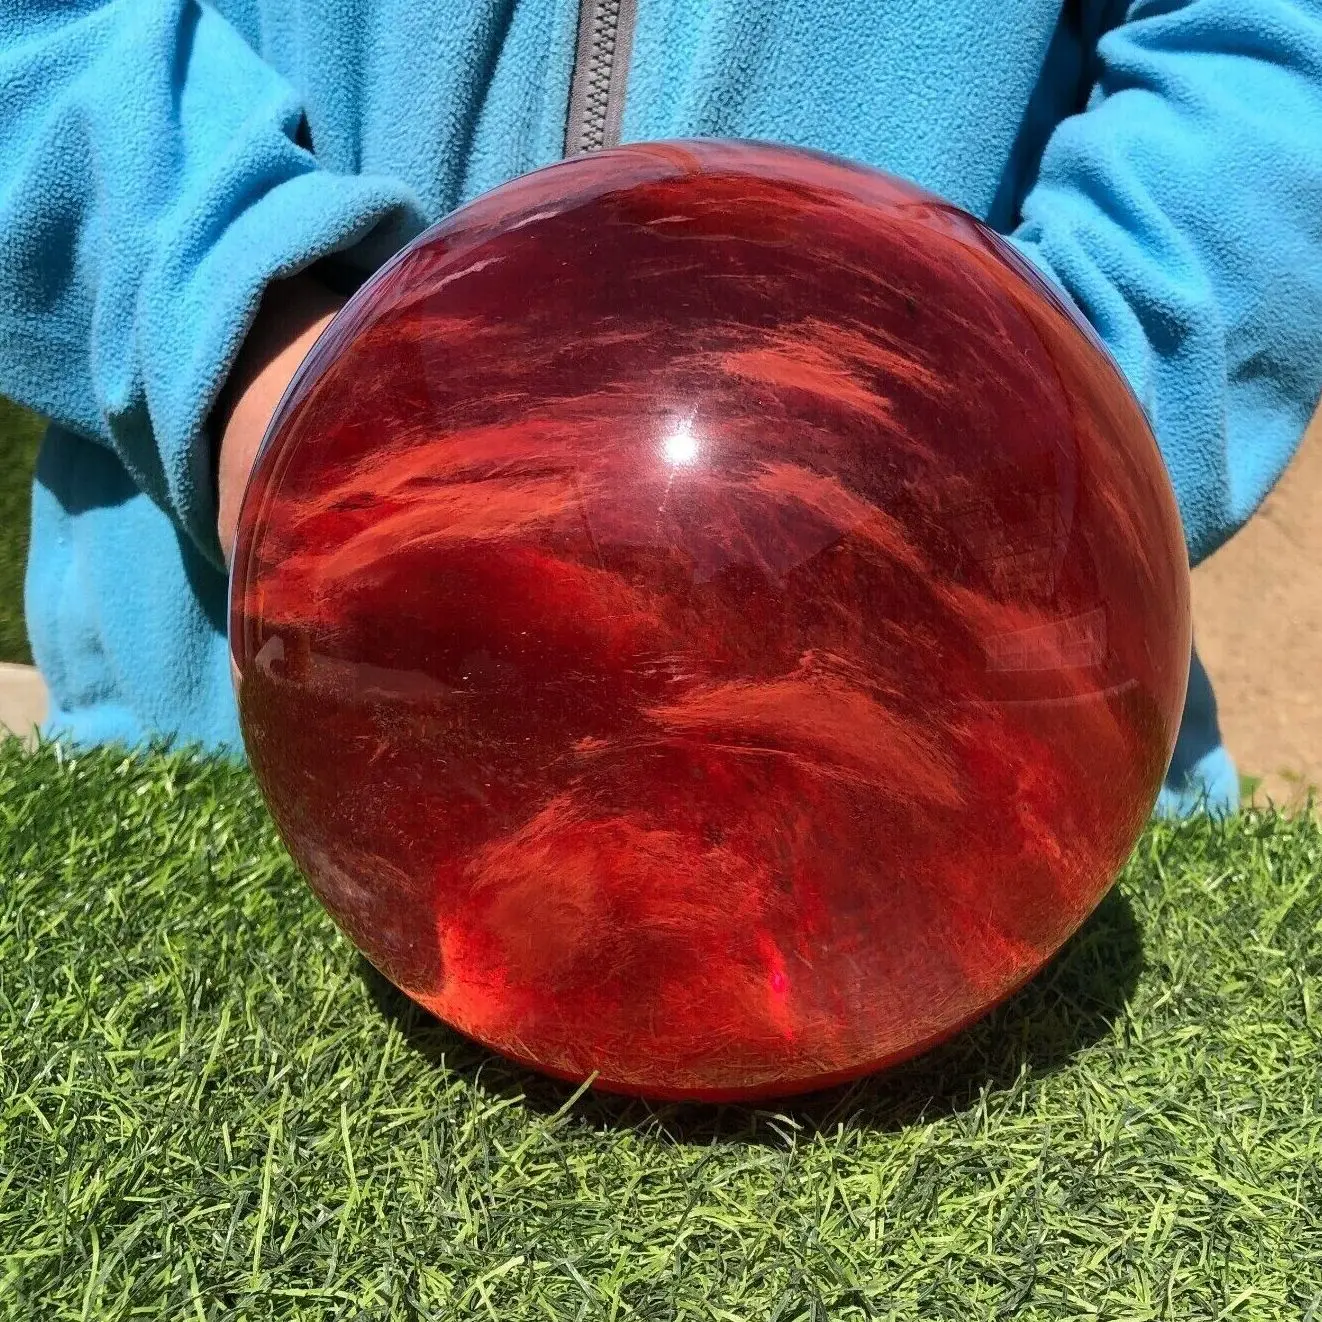 Magical Huge Red Smelting Stone Quartz Ball Crystal Ball Mineral Sample Healing Gem Home Office Degaussing Decoration Gift